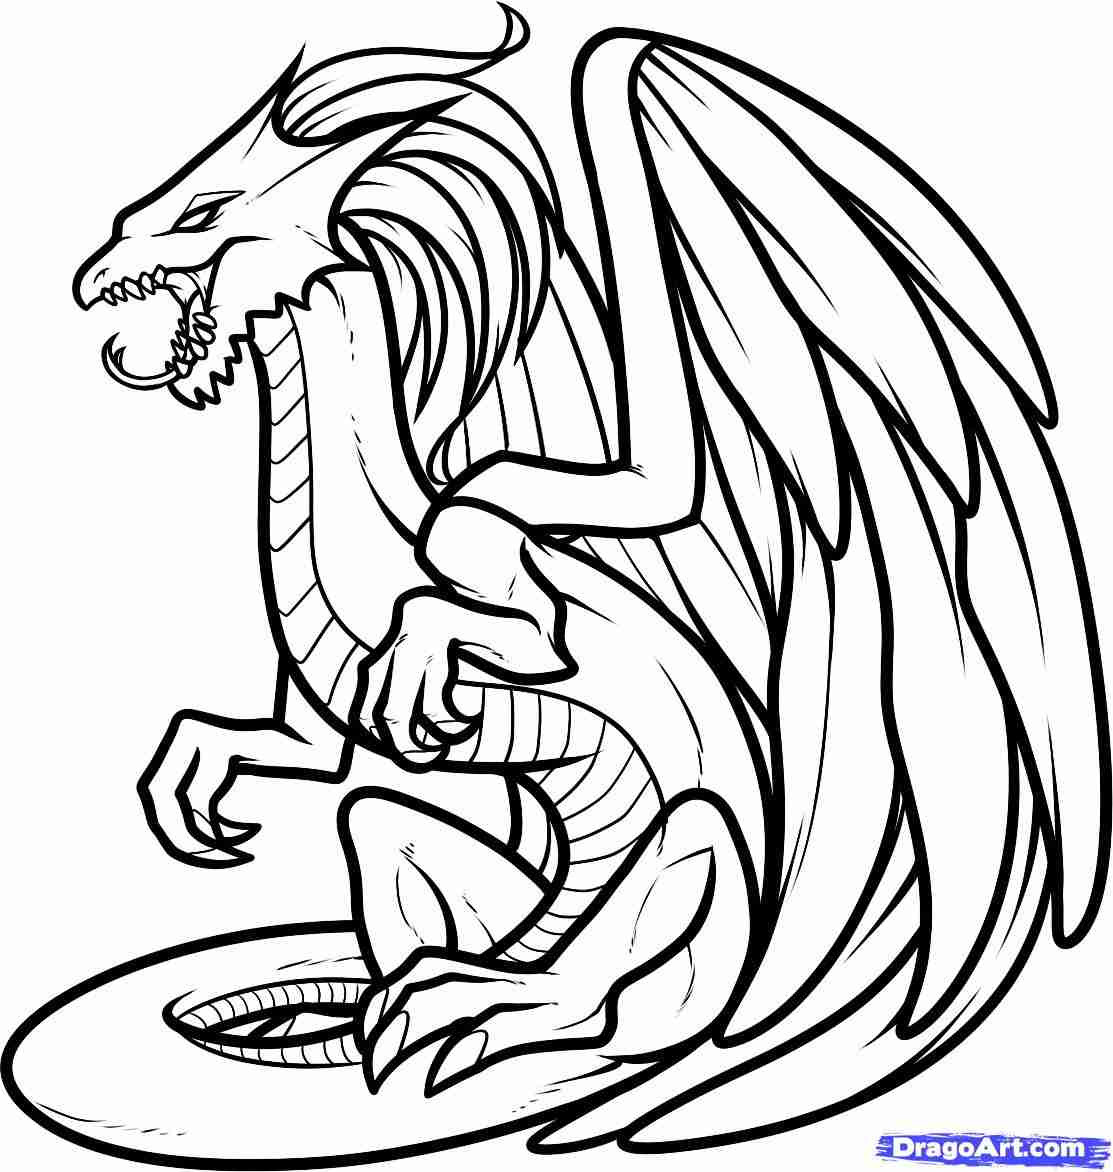 nightwing fire dragon coloring pages